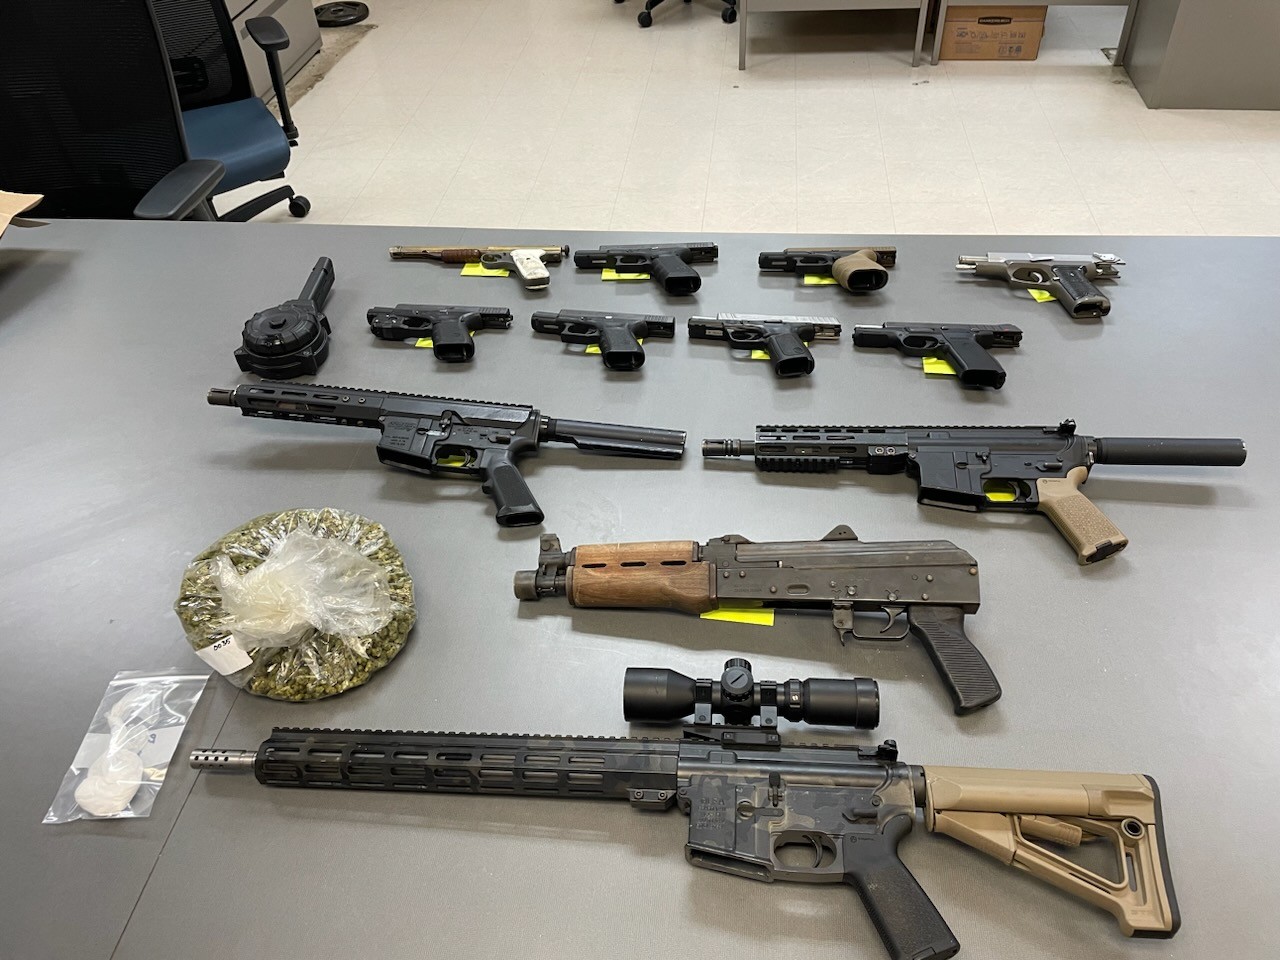 NOPD Announces Arrests, Weapons & Drugs Seized in Multi-Agency Investigation